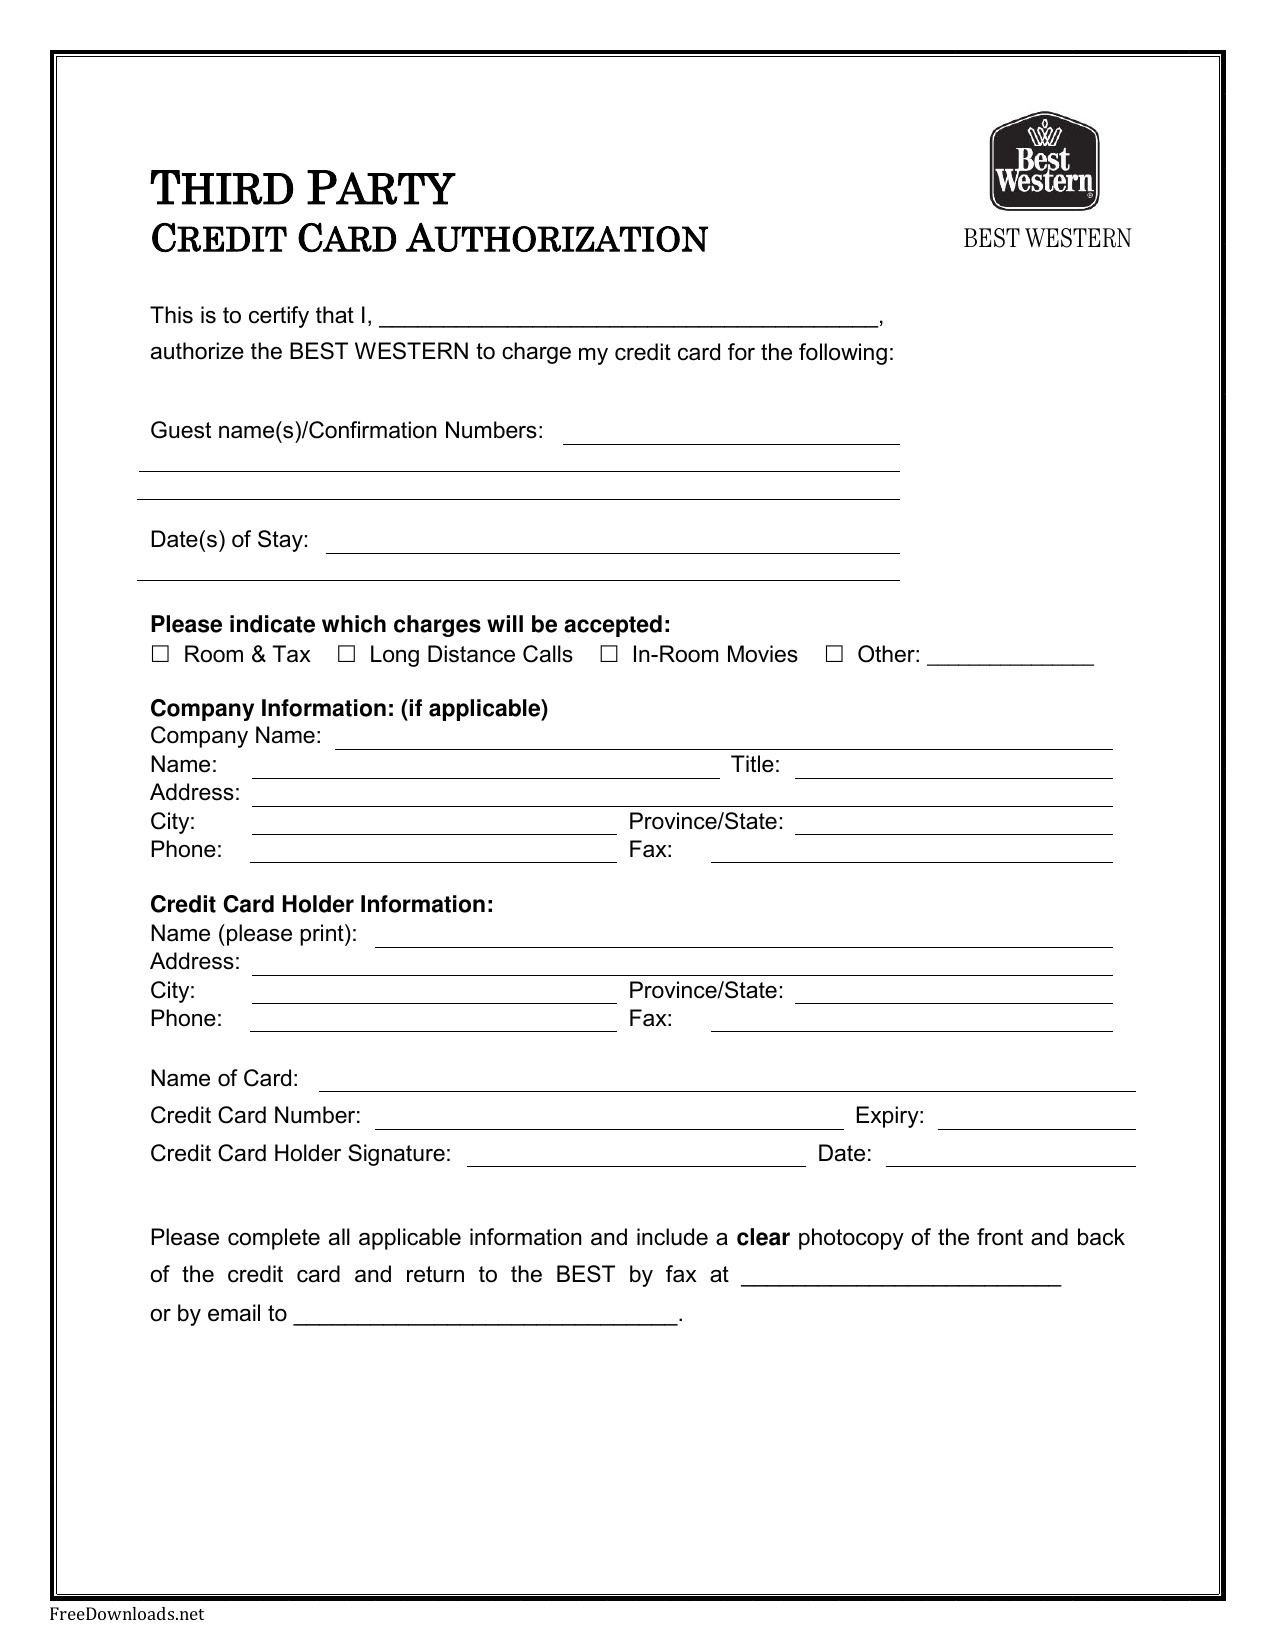 best western credit card authorization form template